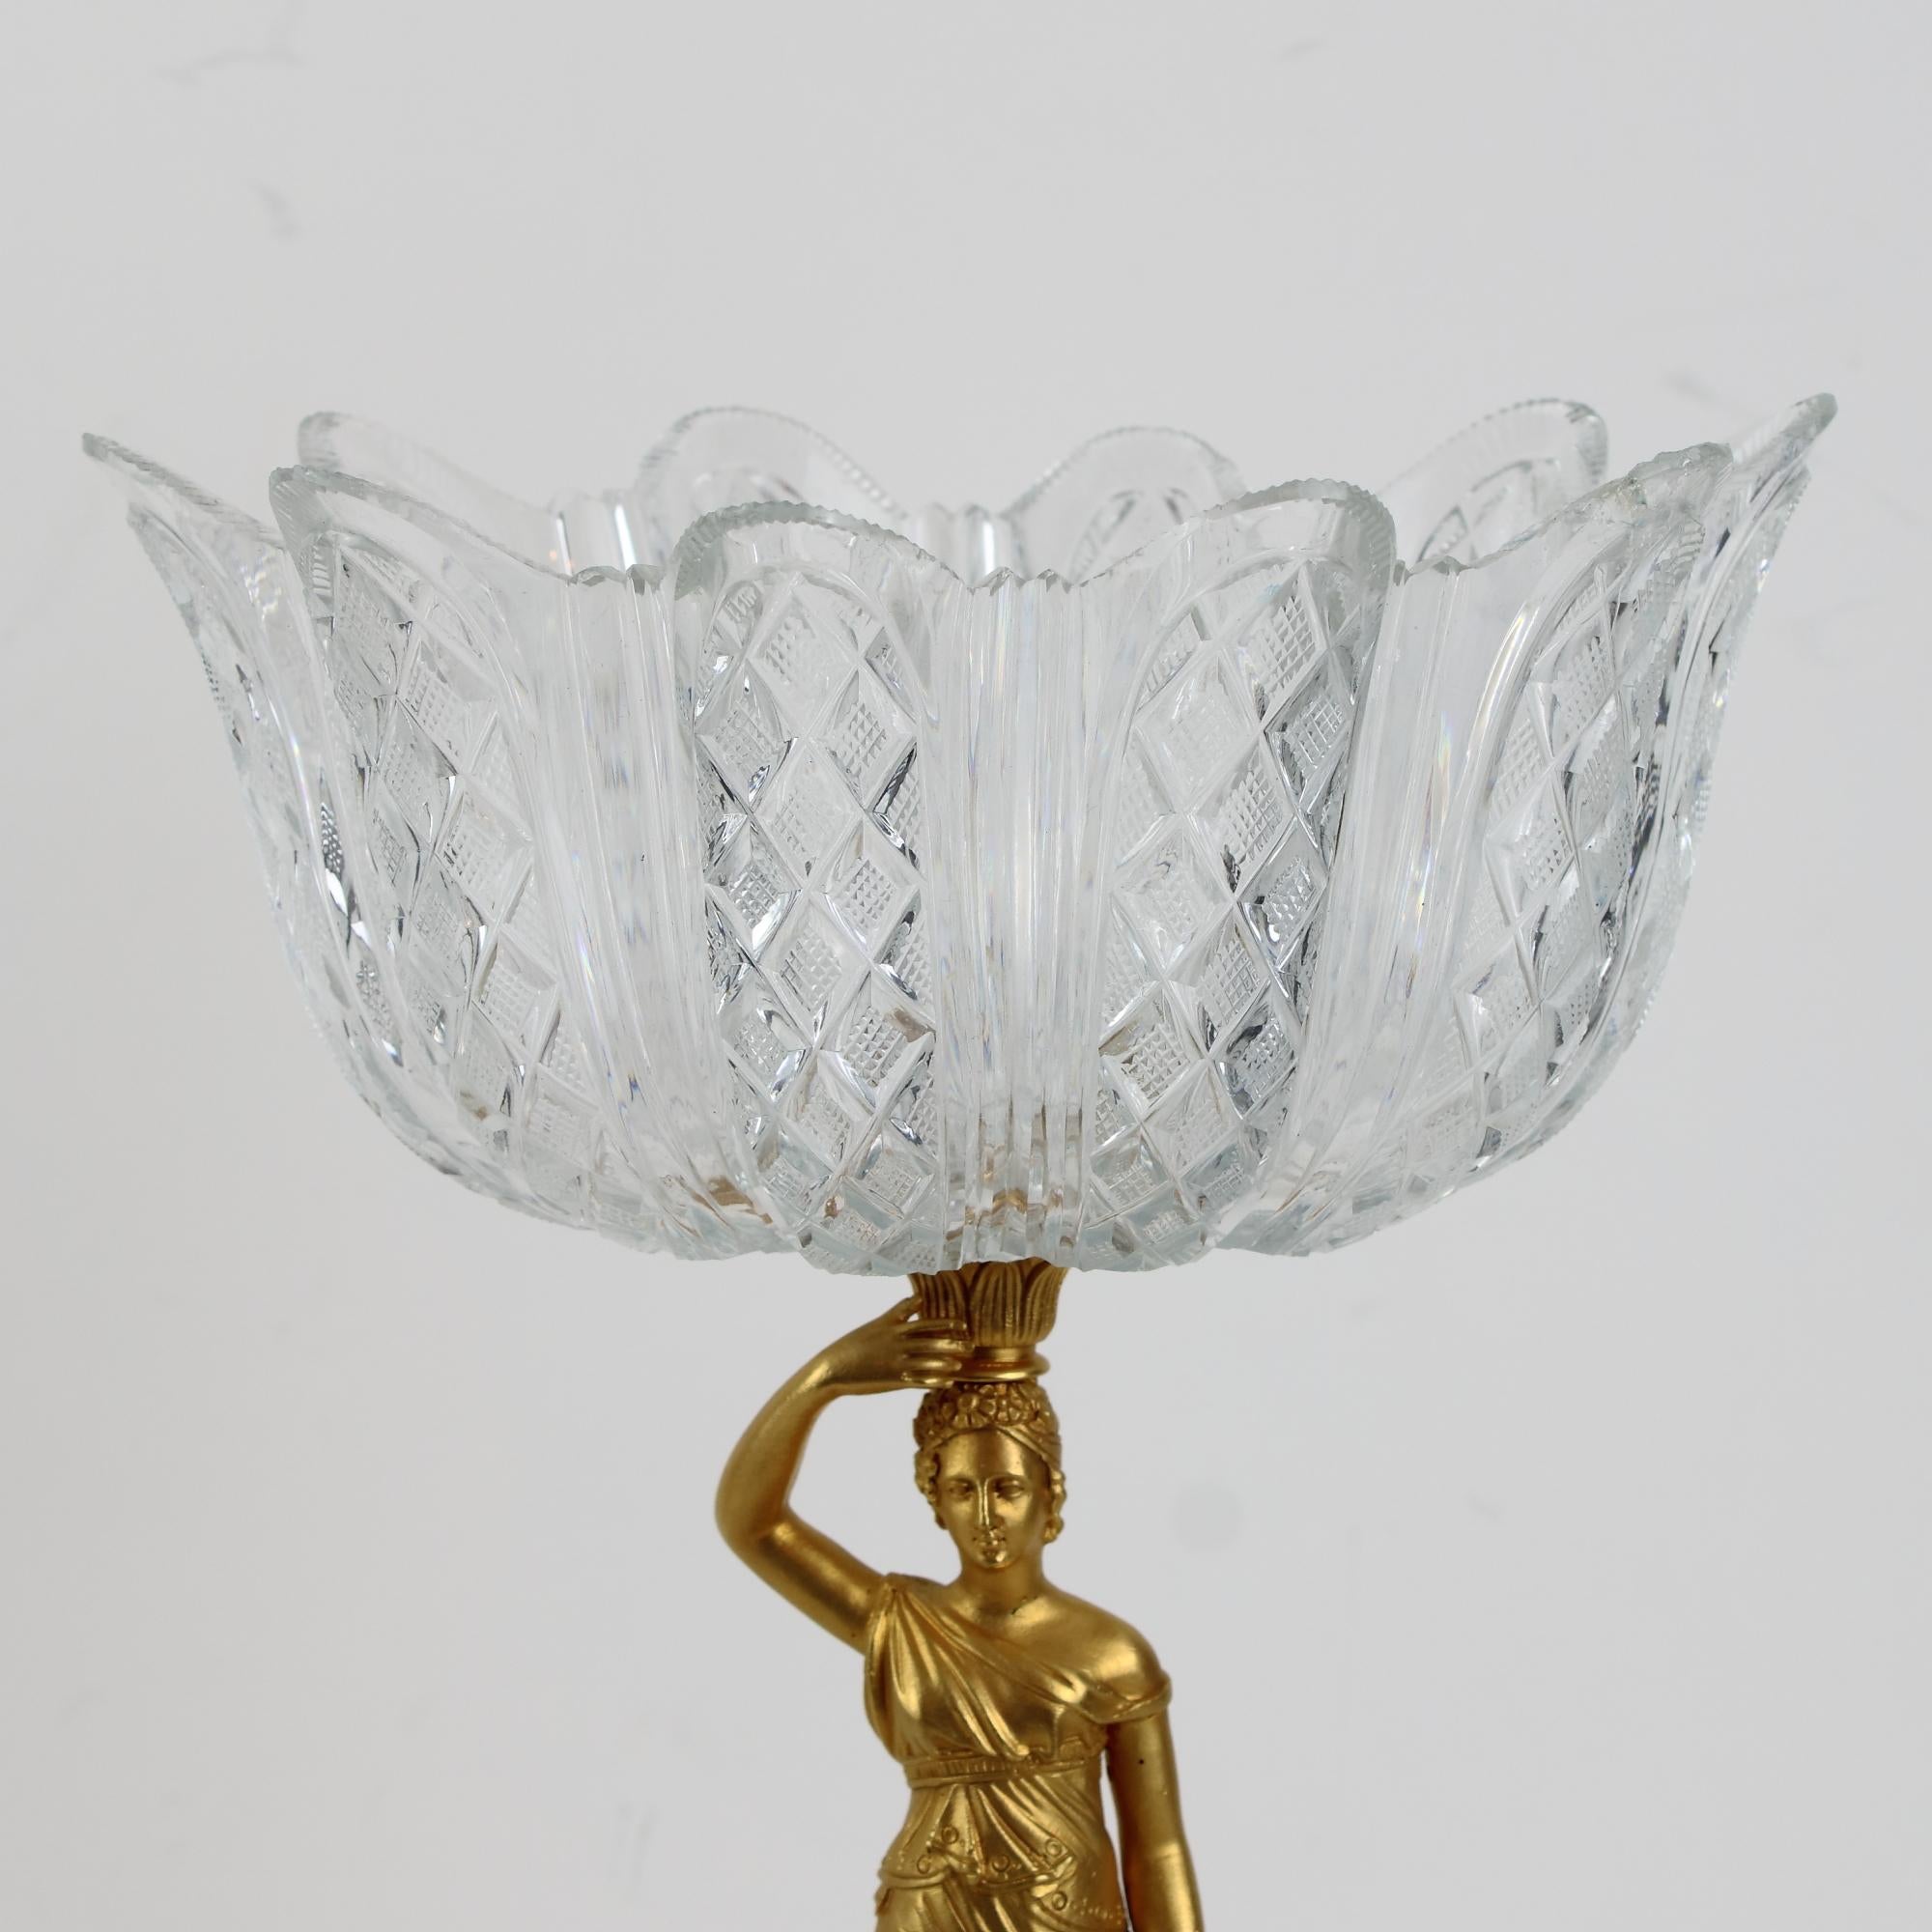 Early 19th Century French Empire Gilt Bronze and Glass Figural Tazza or Bowl 1